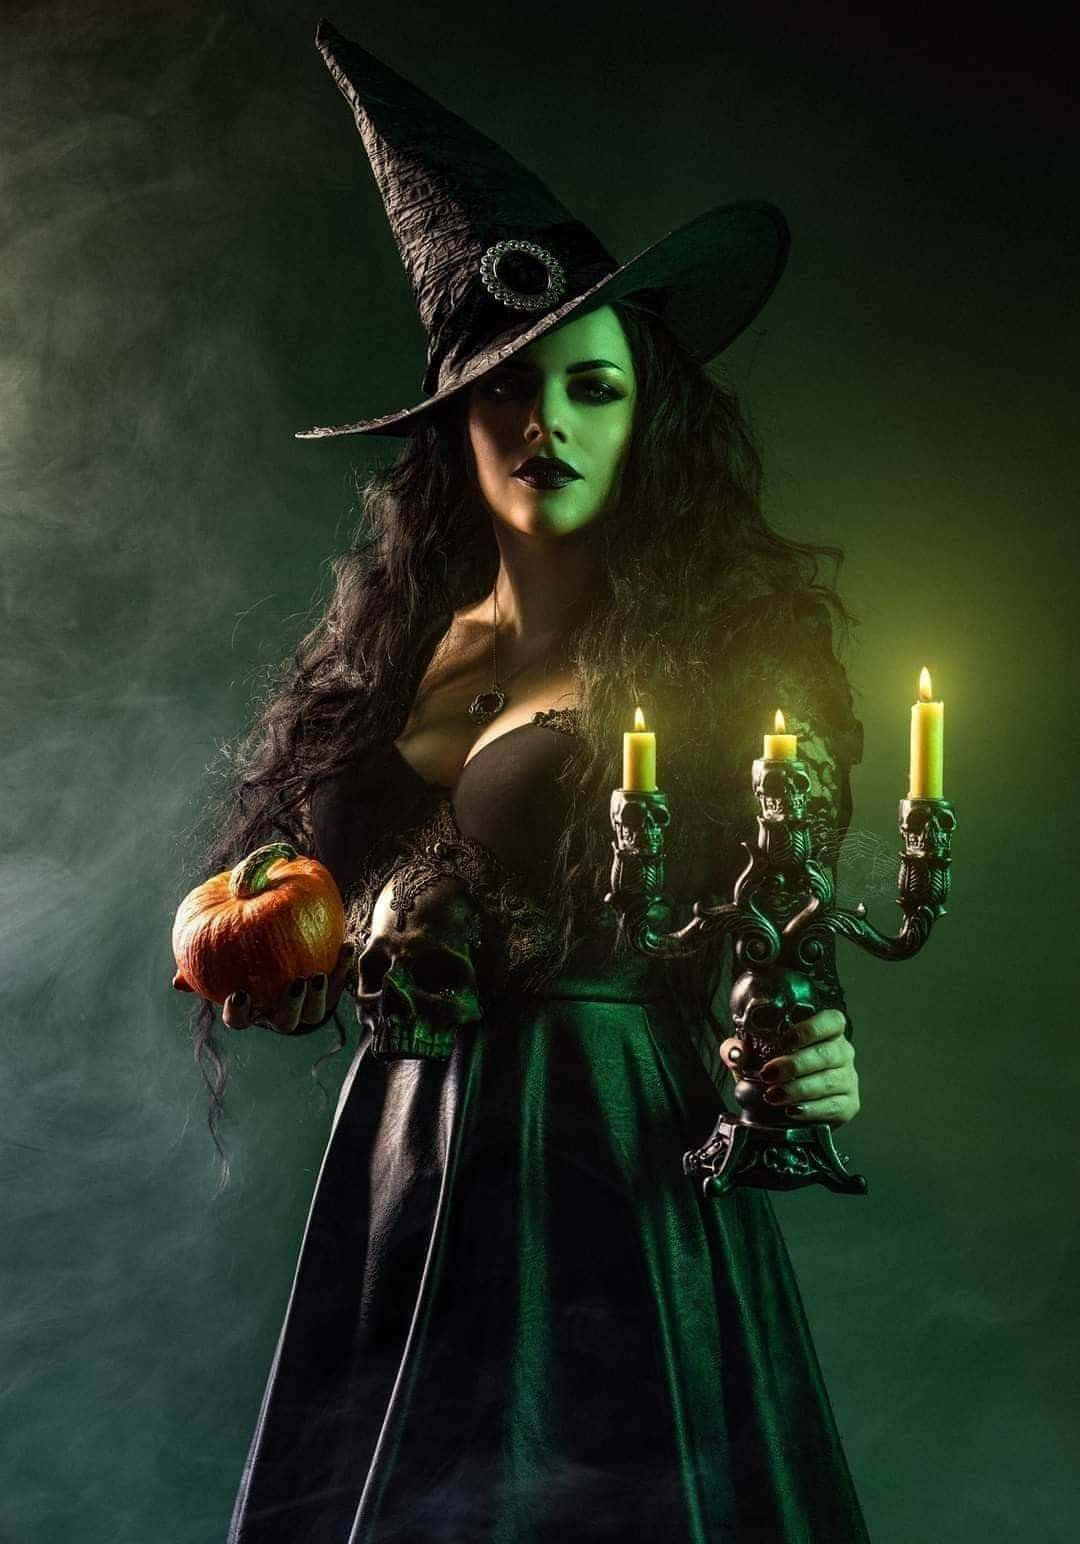 Mystical Witch Costume in Full Glory Wallpaper